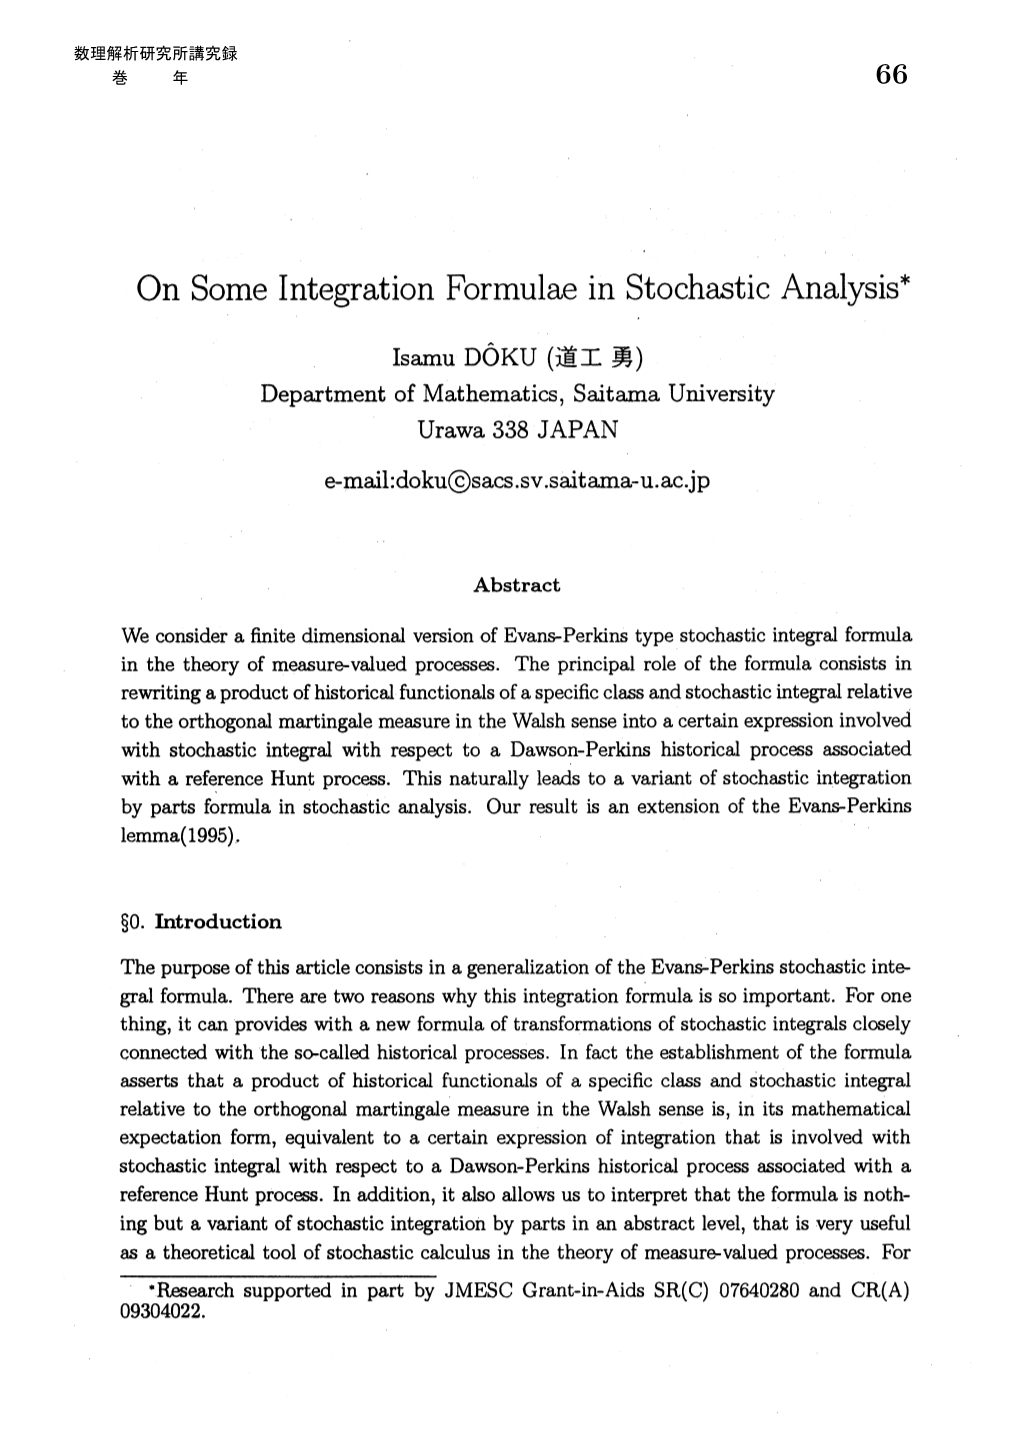 On Some Integration Formulae in Stochastic Analysis*